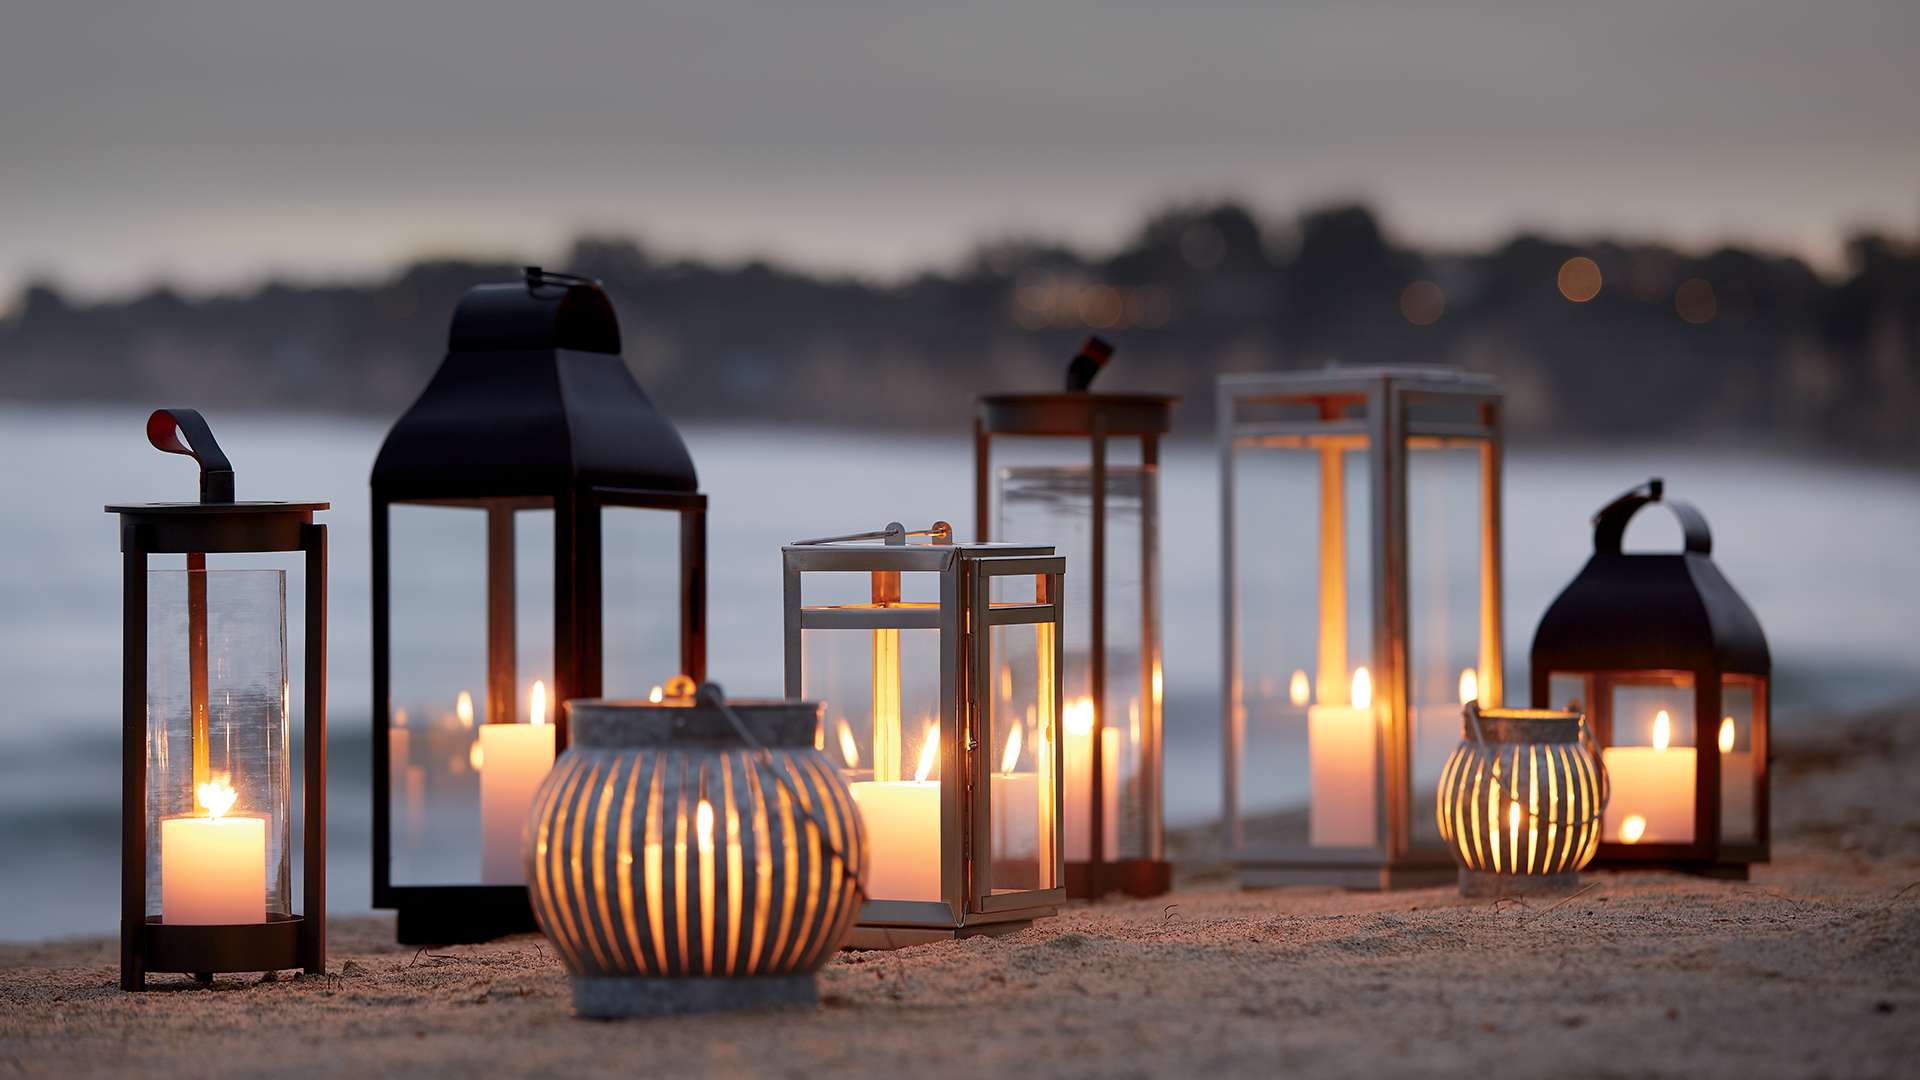 Outdoor Lanterns and Candle Holders lit on a beach